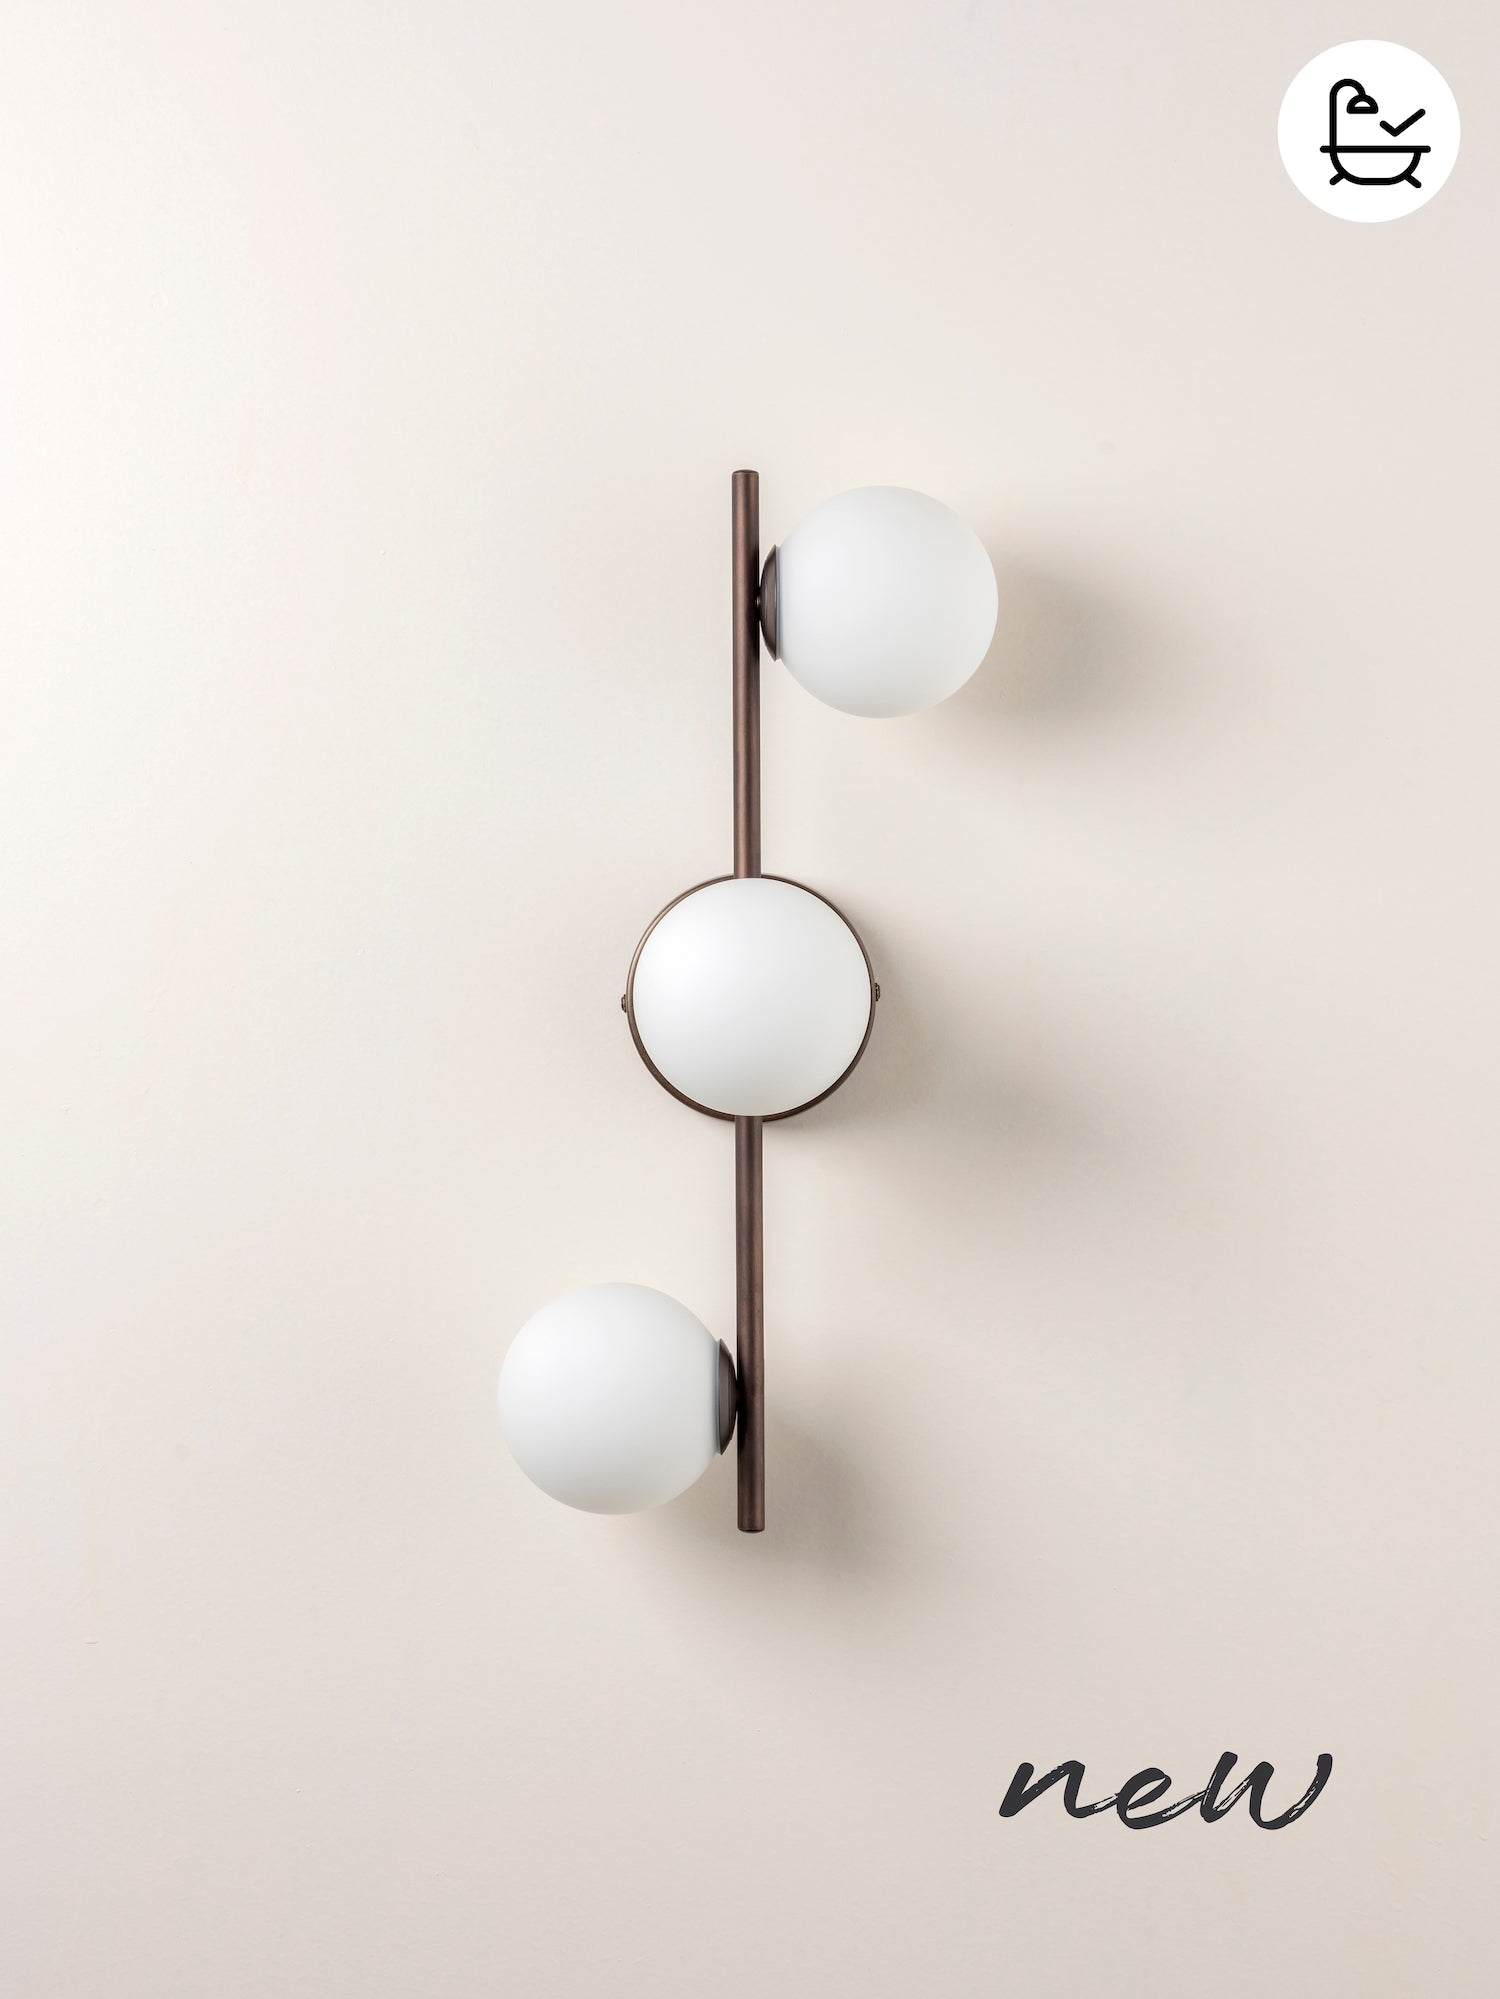 Coro - 3 light bronze and opal ceiling / wall | Ceiling Light | Lights & Lamps Inc | USA